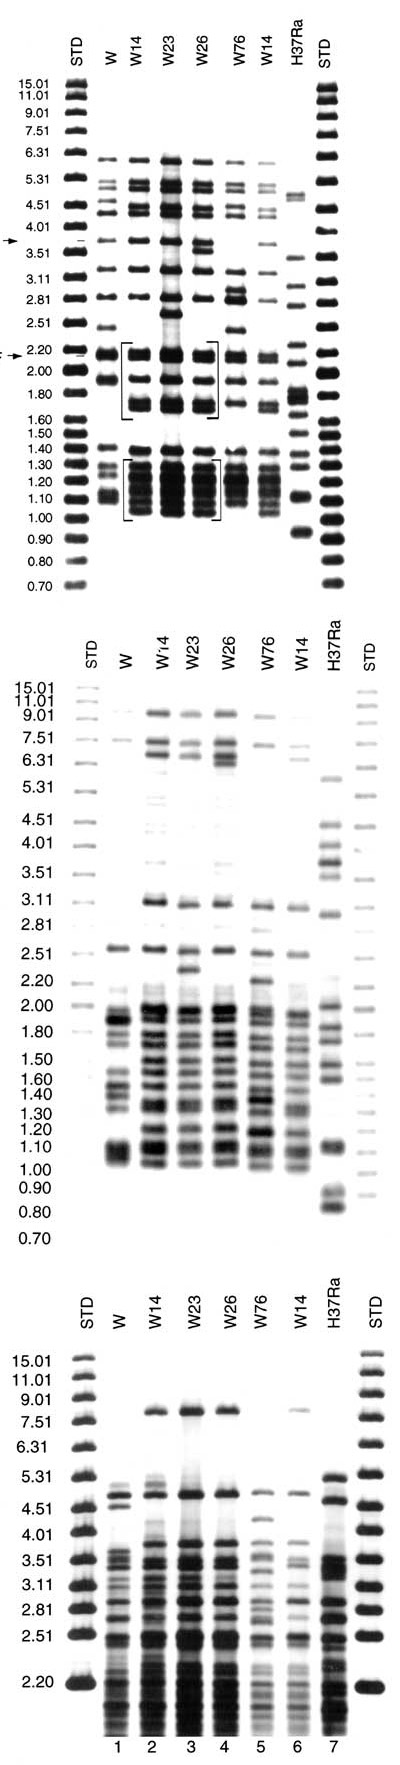 Southern blot hybridization of Mycobacterium tuberculosis isolates. A) IS6110-3' was used as a hybridization probe. The bracketed pattern motives regions are characteristic of the W14 family. A1 and NTF denote the bands corresponding to the IS6110 insertions in the dnaA-dnaN region and the NTF locus, respectively. Lanes 1 and 9 are standard markers; lane 2: W-MDR from New York City (W index strain); lane 3, 4, 5 and 7: members of the W14 family; lane 6: W76 and lane 8: laboratory control strain 